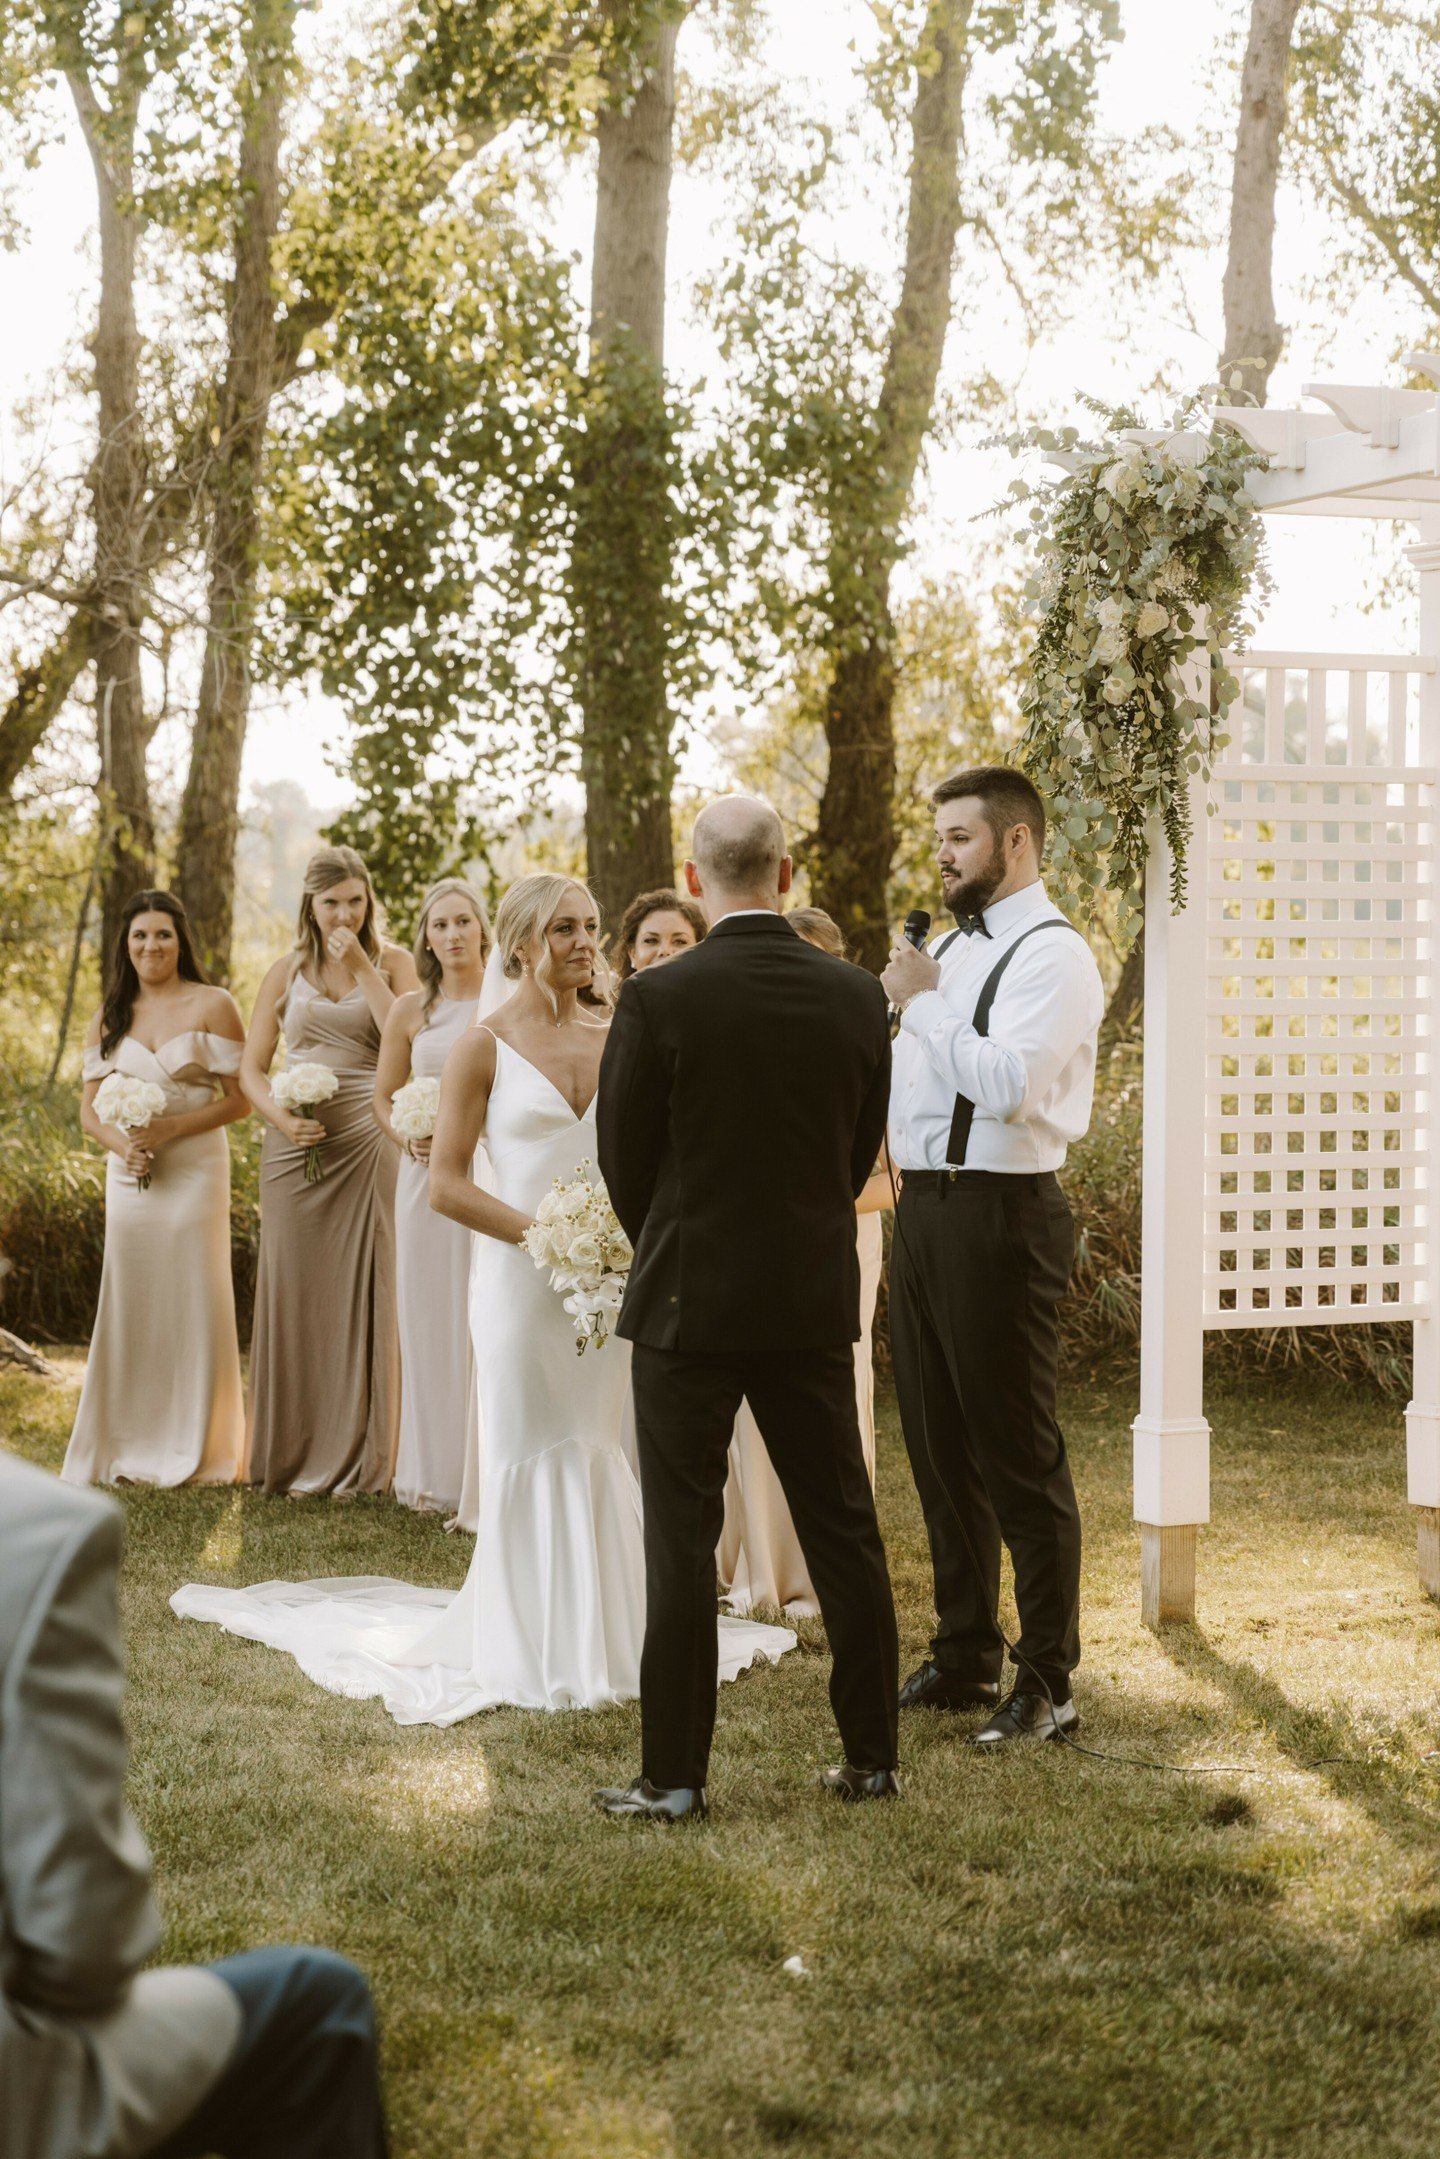 Raise your hand if you think this looks like the perfect place to say &ldquo;I Do&rdquo; 💞

Tucked away from all the hustle and bustle, our white arbor is nestled between a grove of trees surrounded by reclaimed wood benches to accommodate your gues